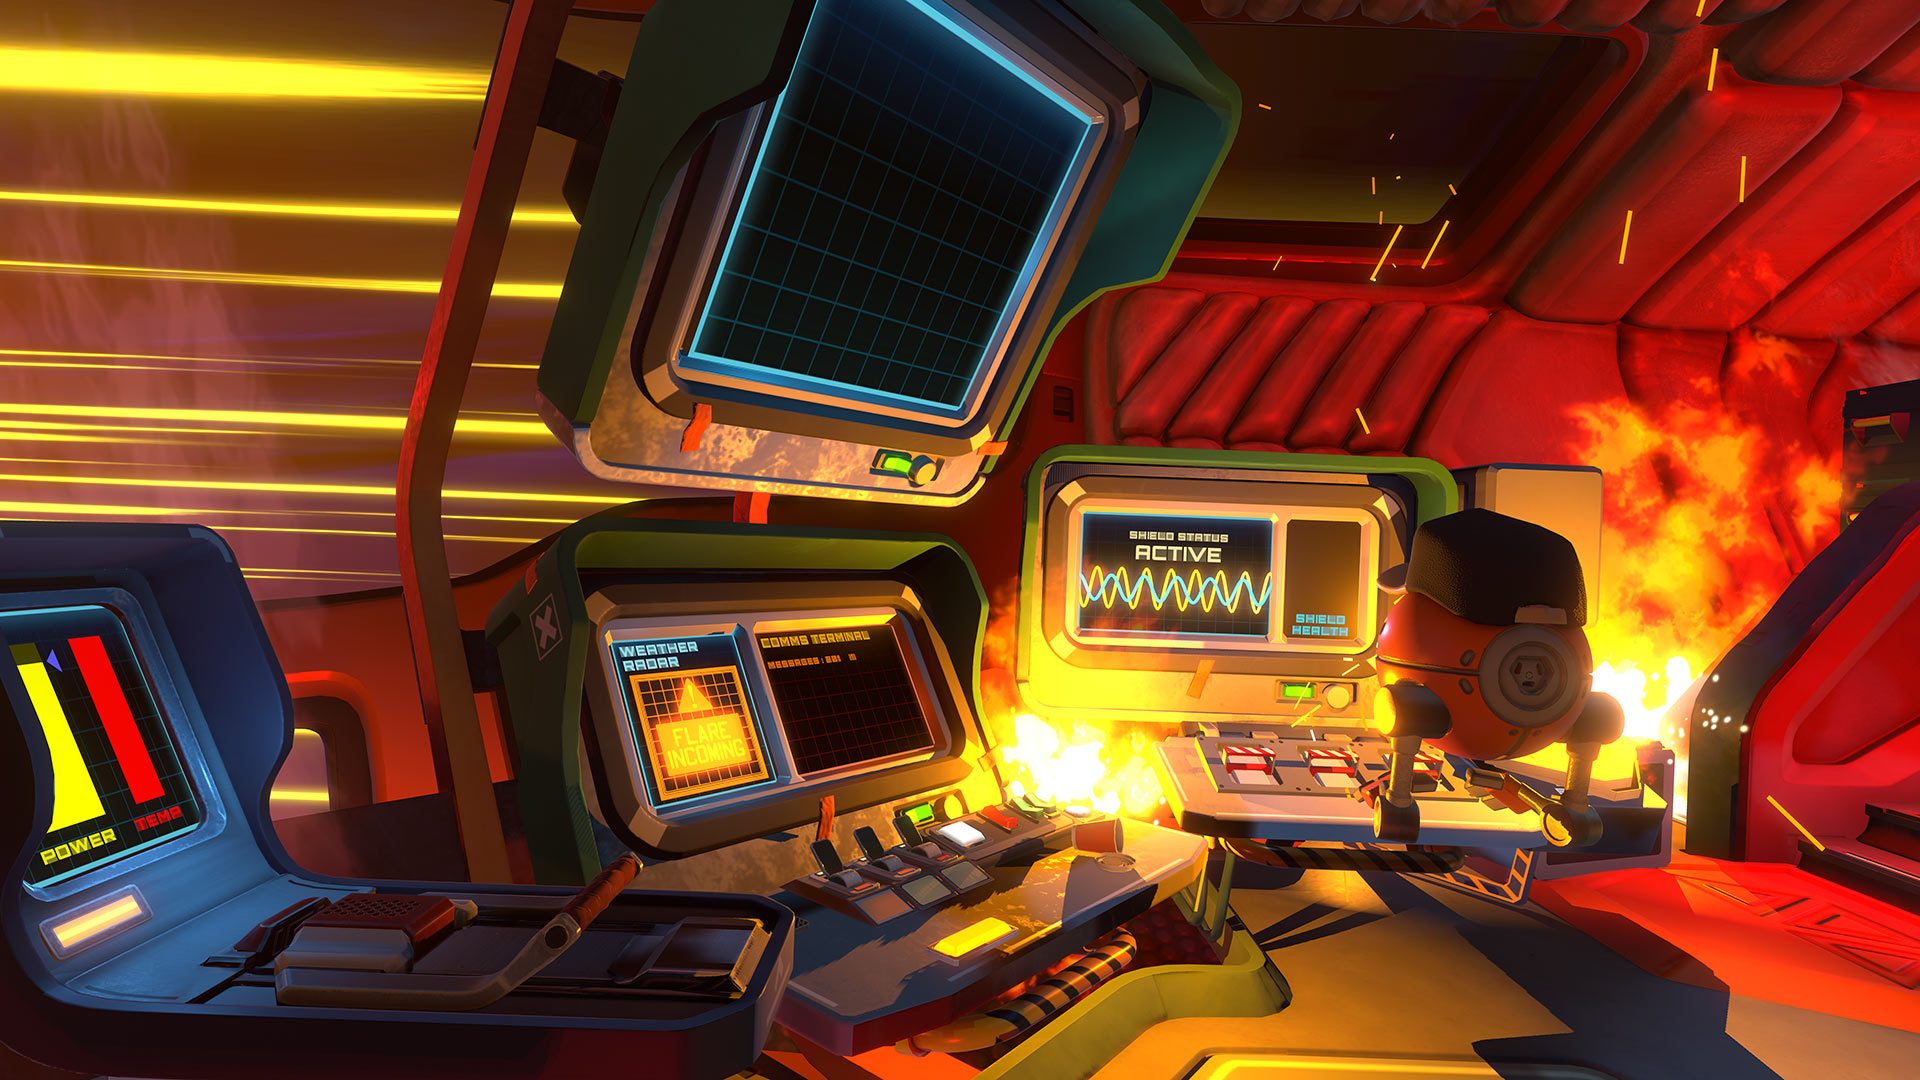 Co-op VR Space Delivery 'Failspace' Starts Registration for Closed Alpha – Road to VR